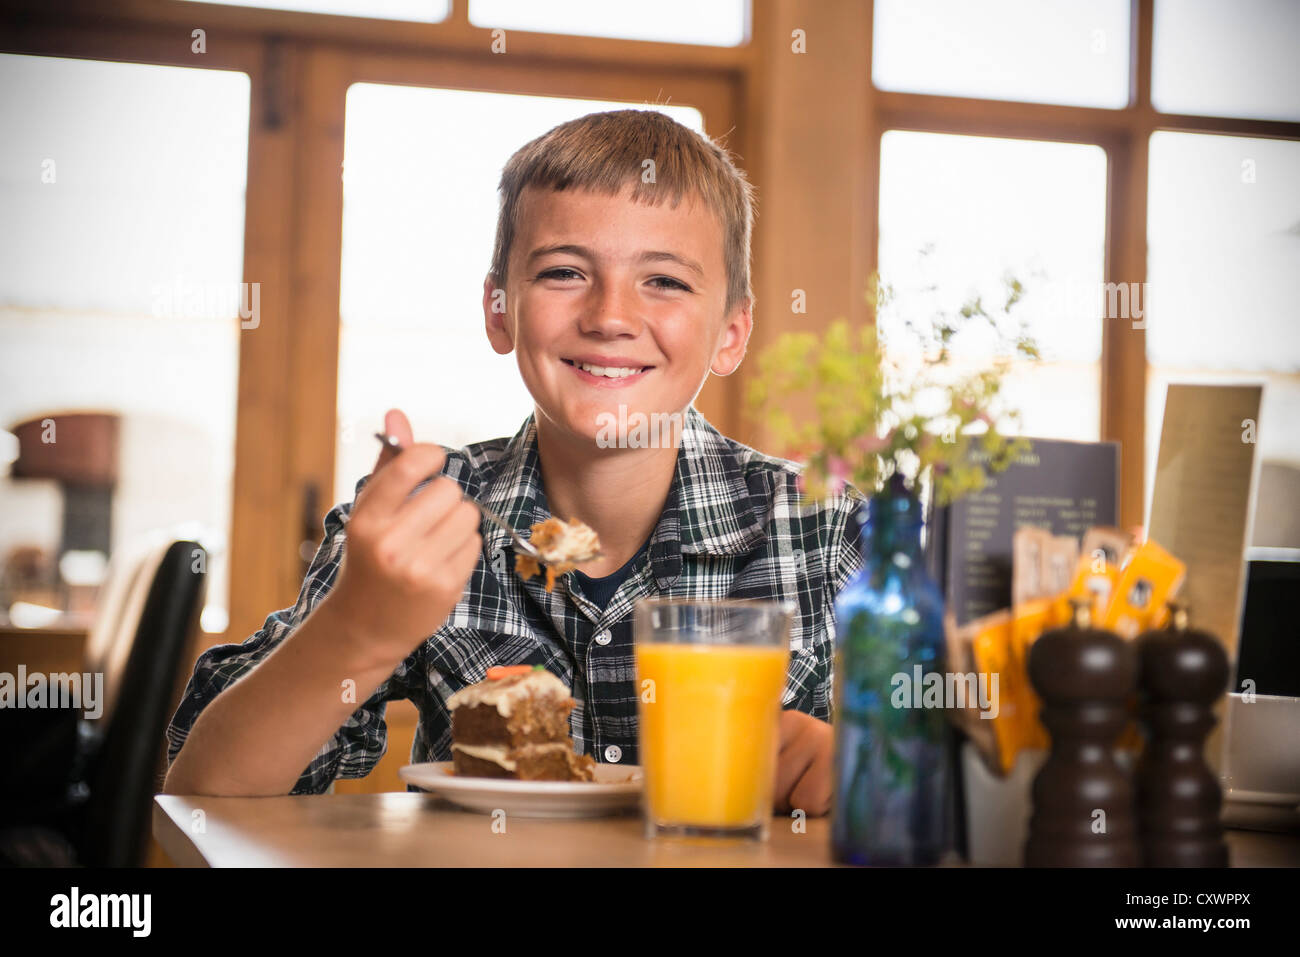 Smiling boy eating breakfast at table Stock Photo